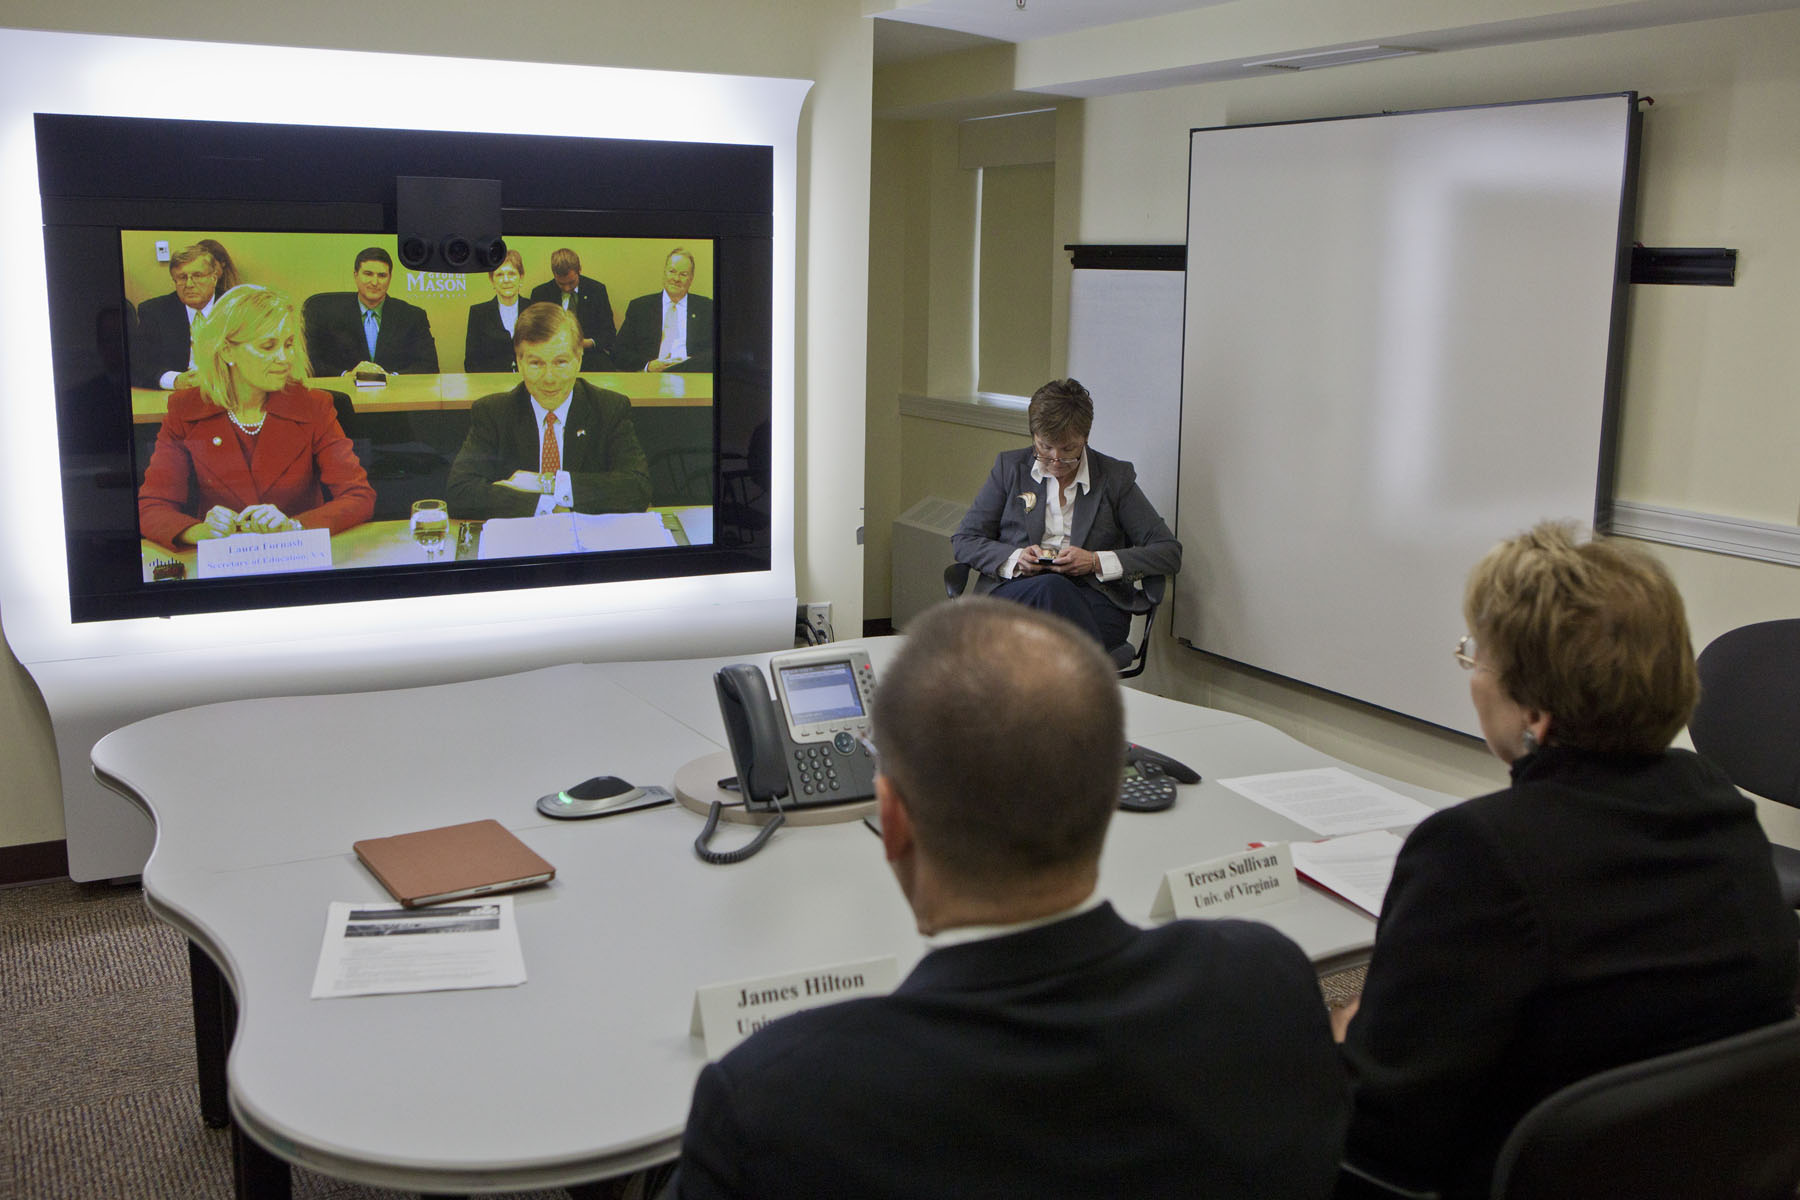 UVA leadership sits at a table and participates in a video conference with other universities